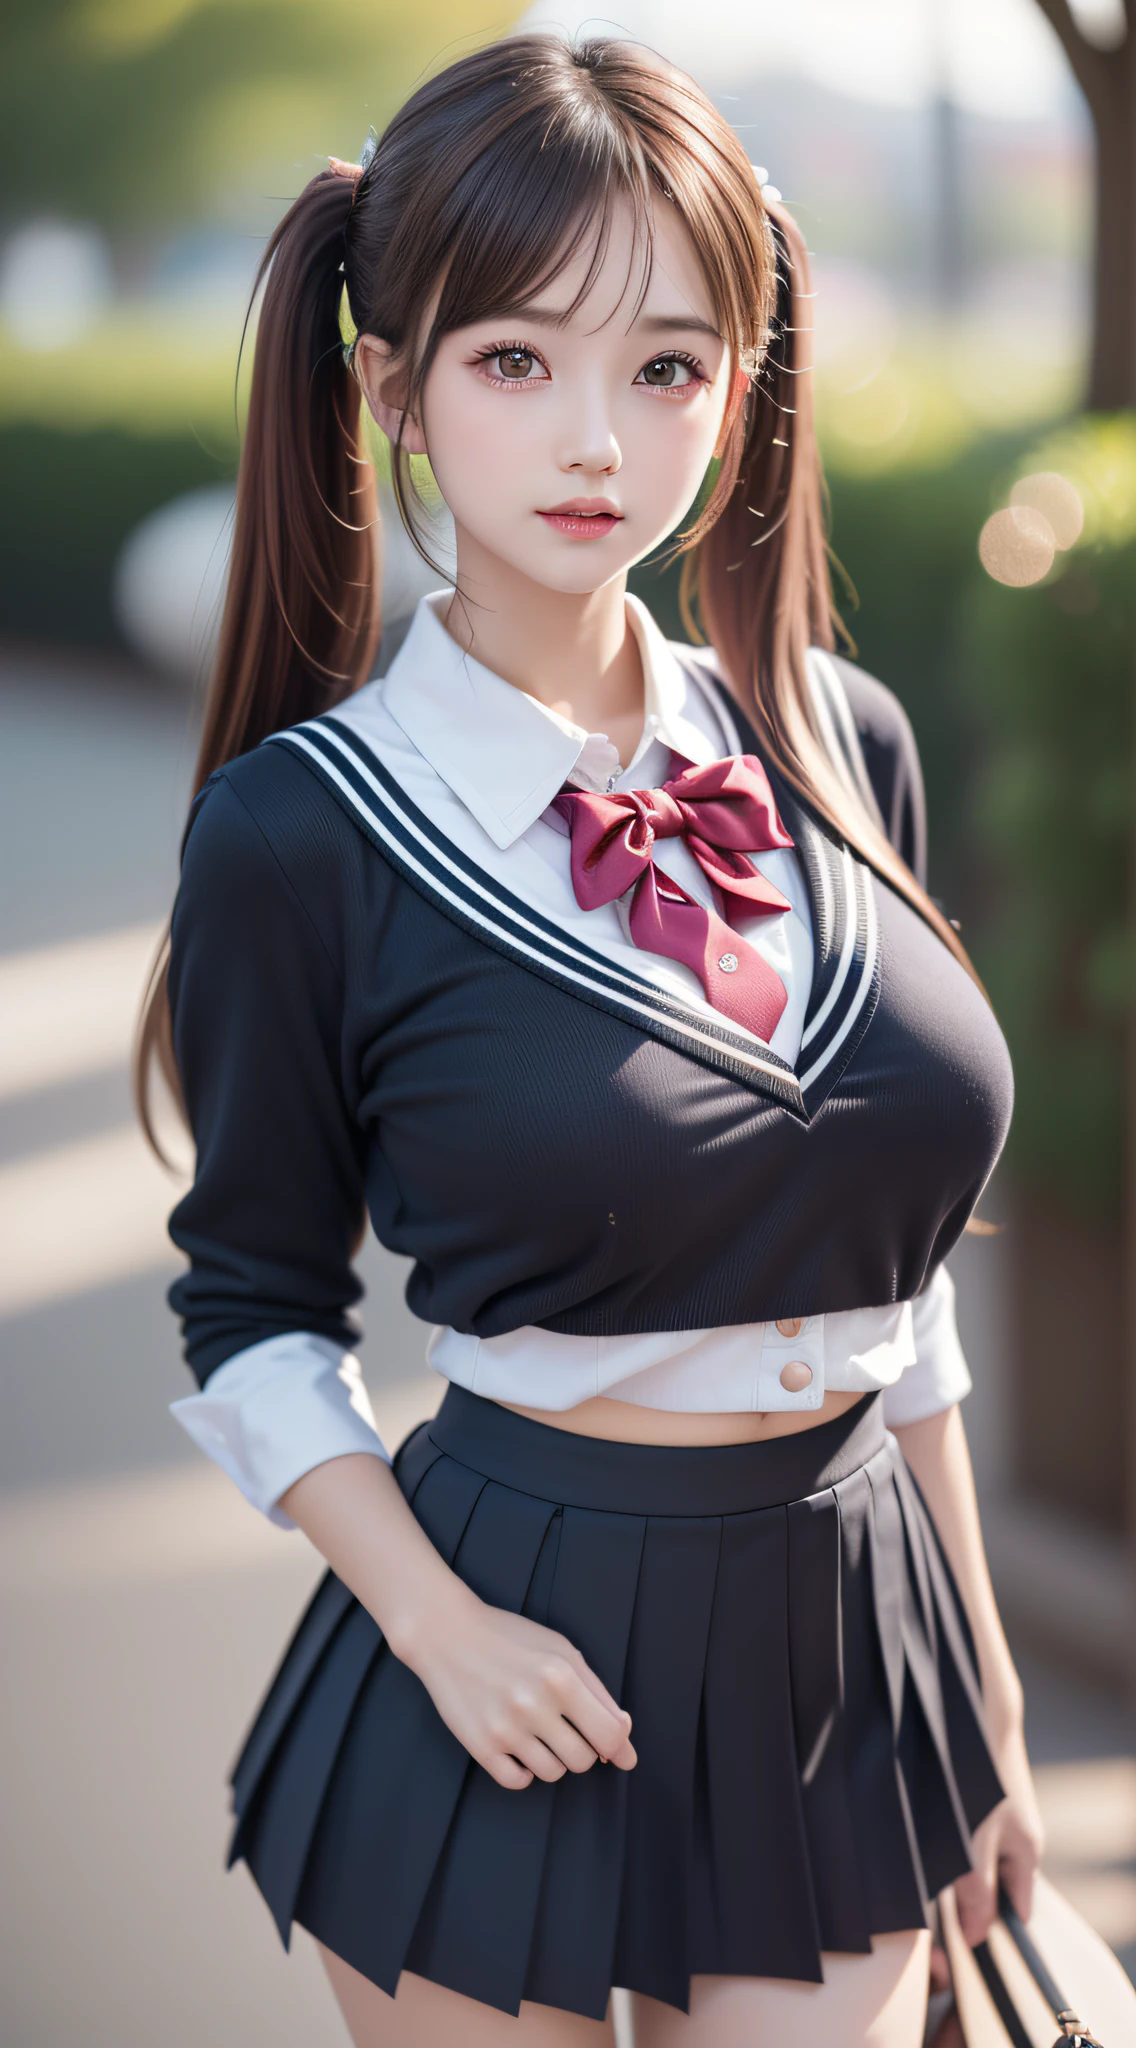 ((2girls)), ((Best Quality)), (Ultra-detailed), (extremely detailed CG unified 8k wallpaper), Highly detailed, High-definition raw color photos, Professional Photography, (Twintails), Brown hair, Amazing face and eyes, Pink eyes, (hi-school uniform, pleated mini skirt:1.3), (amazingly beautiful girl), (((Bokeh))), depth of fields,